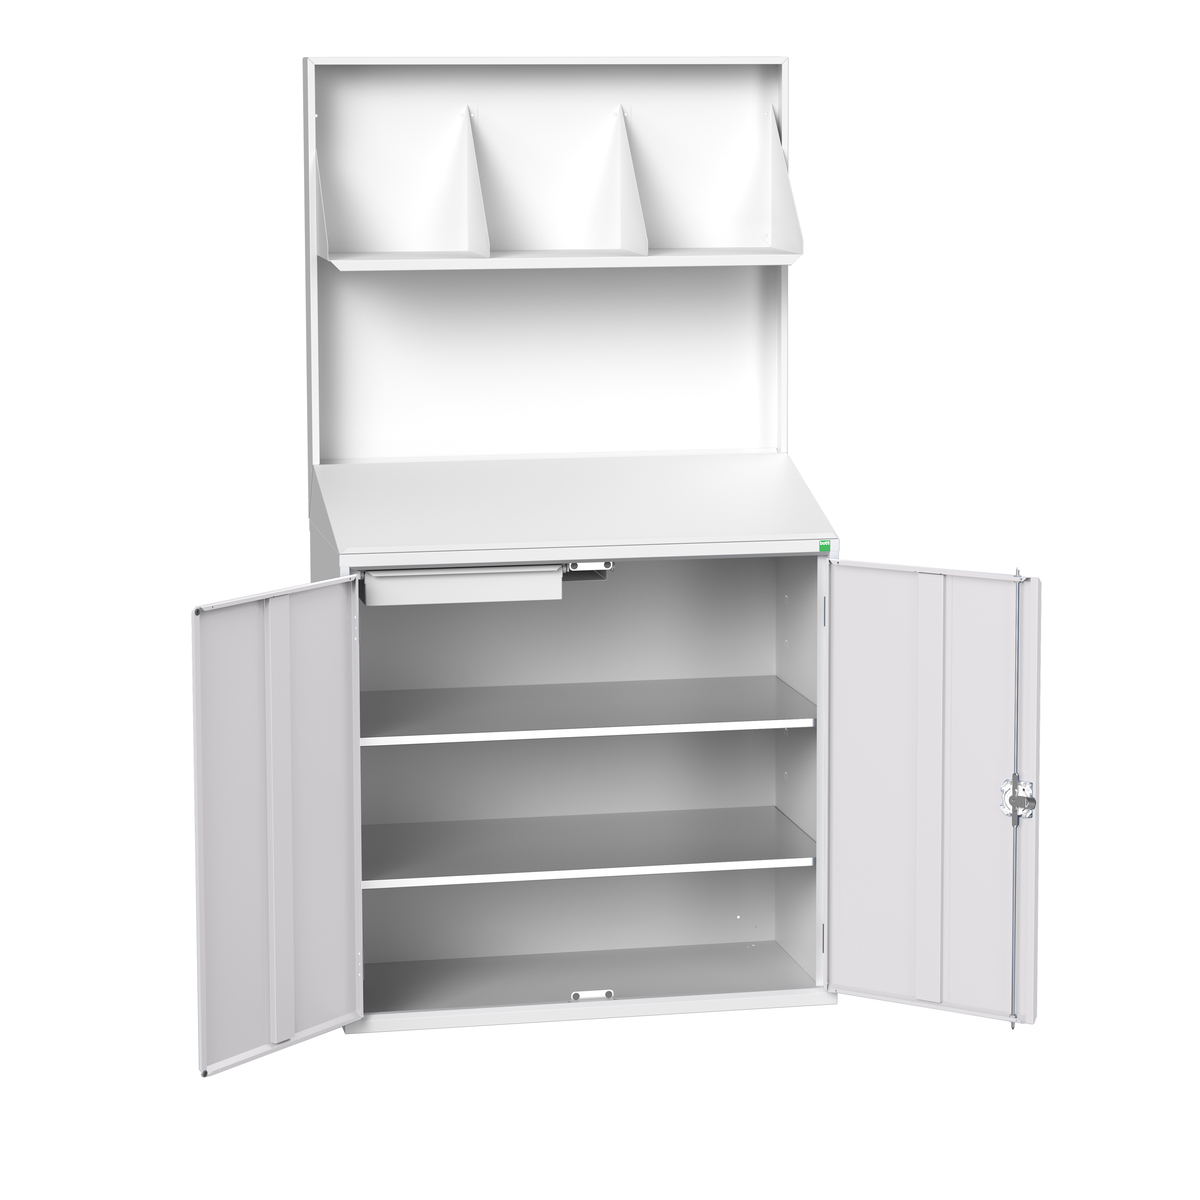 16929218.16 - verso economy lectern with backpanel